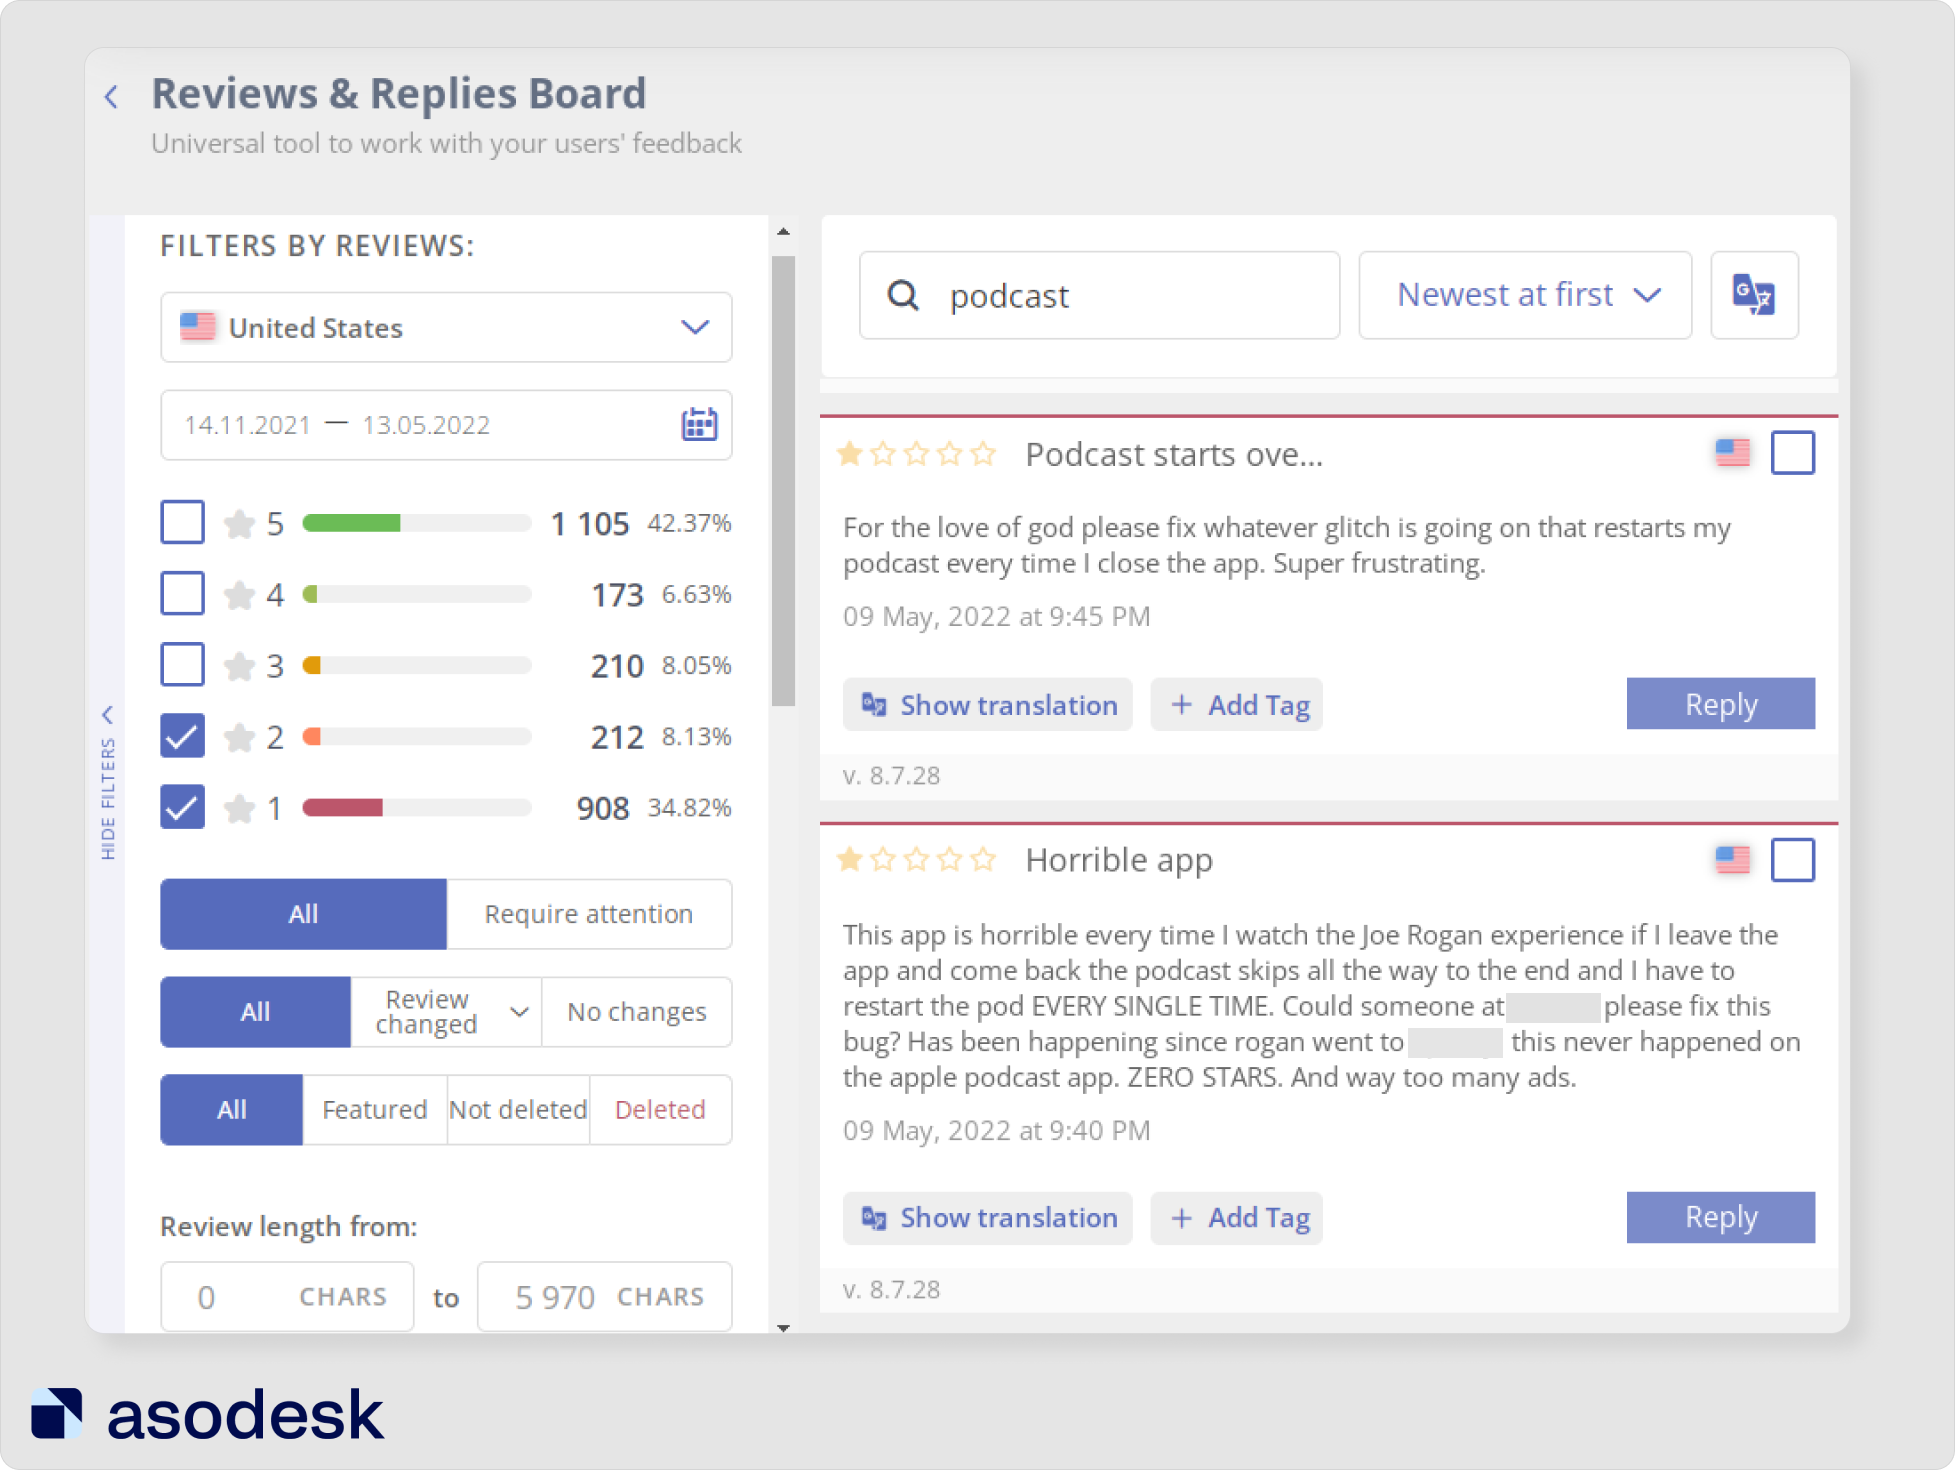 In Reviews & Replies Board in Asodesk you can find reviews with the rating, length and words you need